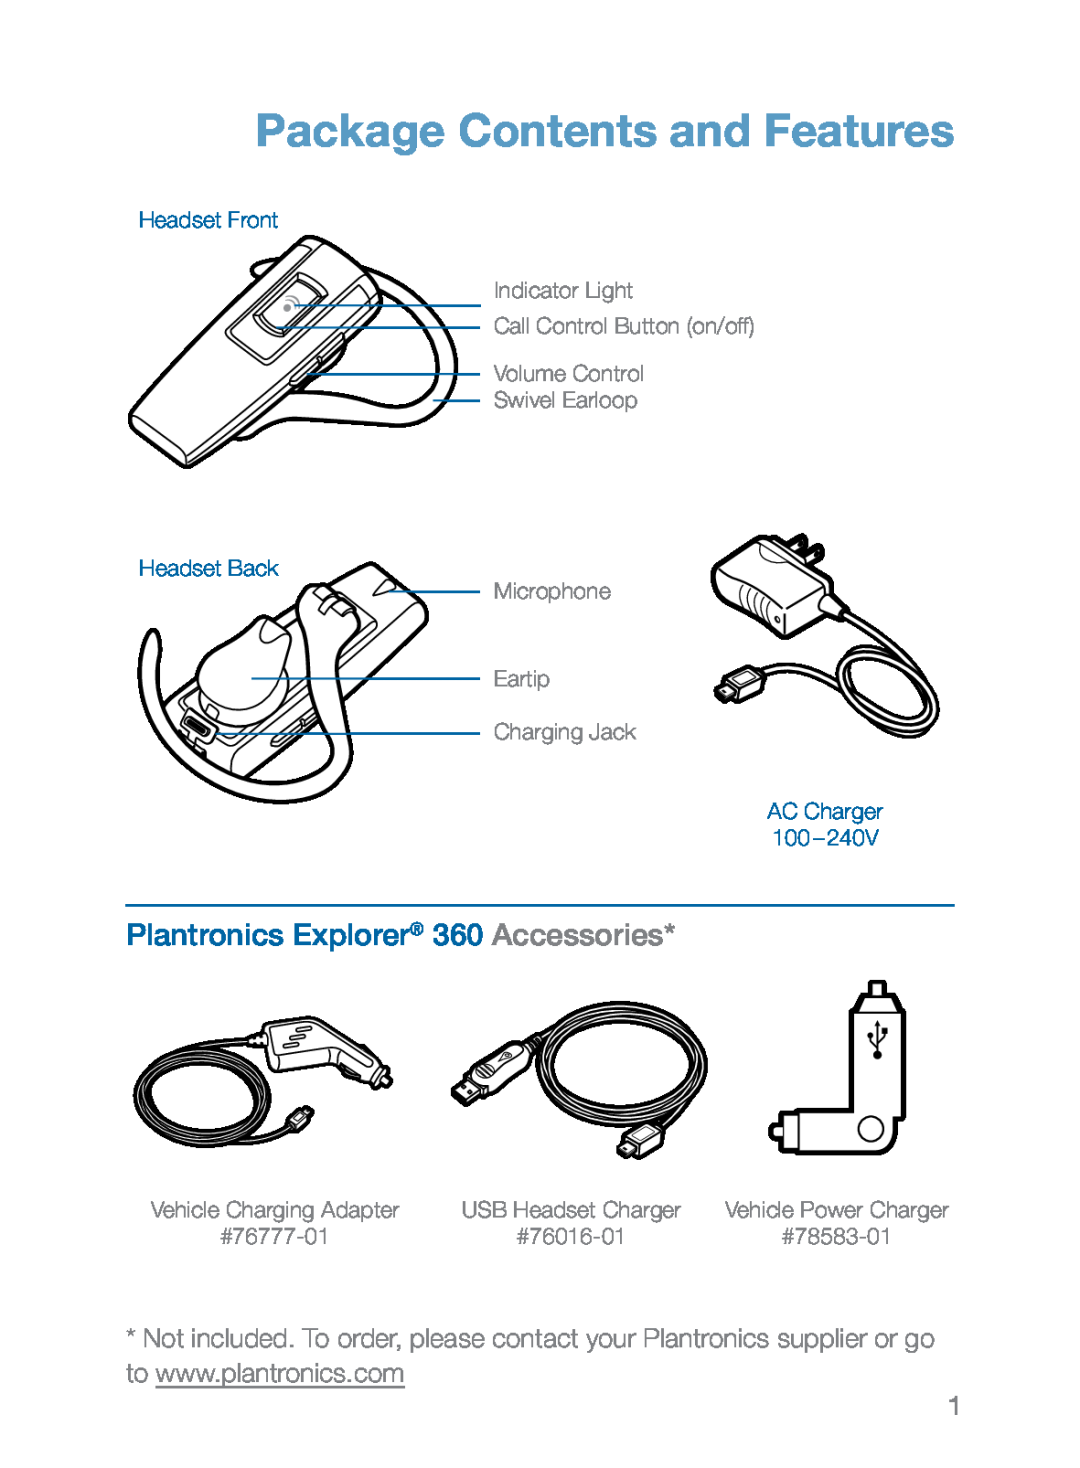 Plantronics manual Package Contents and Features, Plantronics Explorer 360 Accessories, Vehicle Charging Adapter 